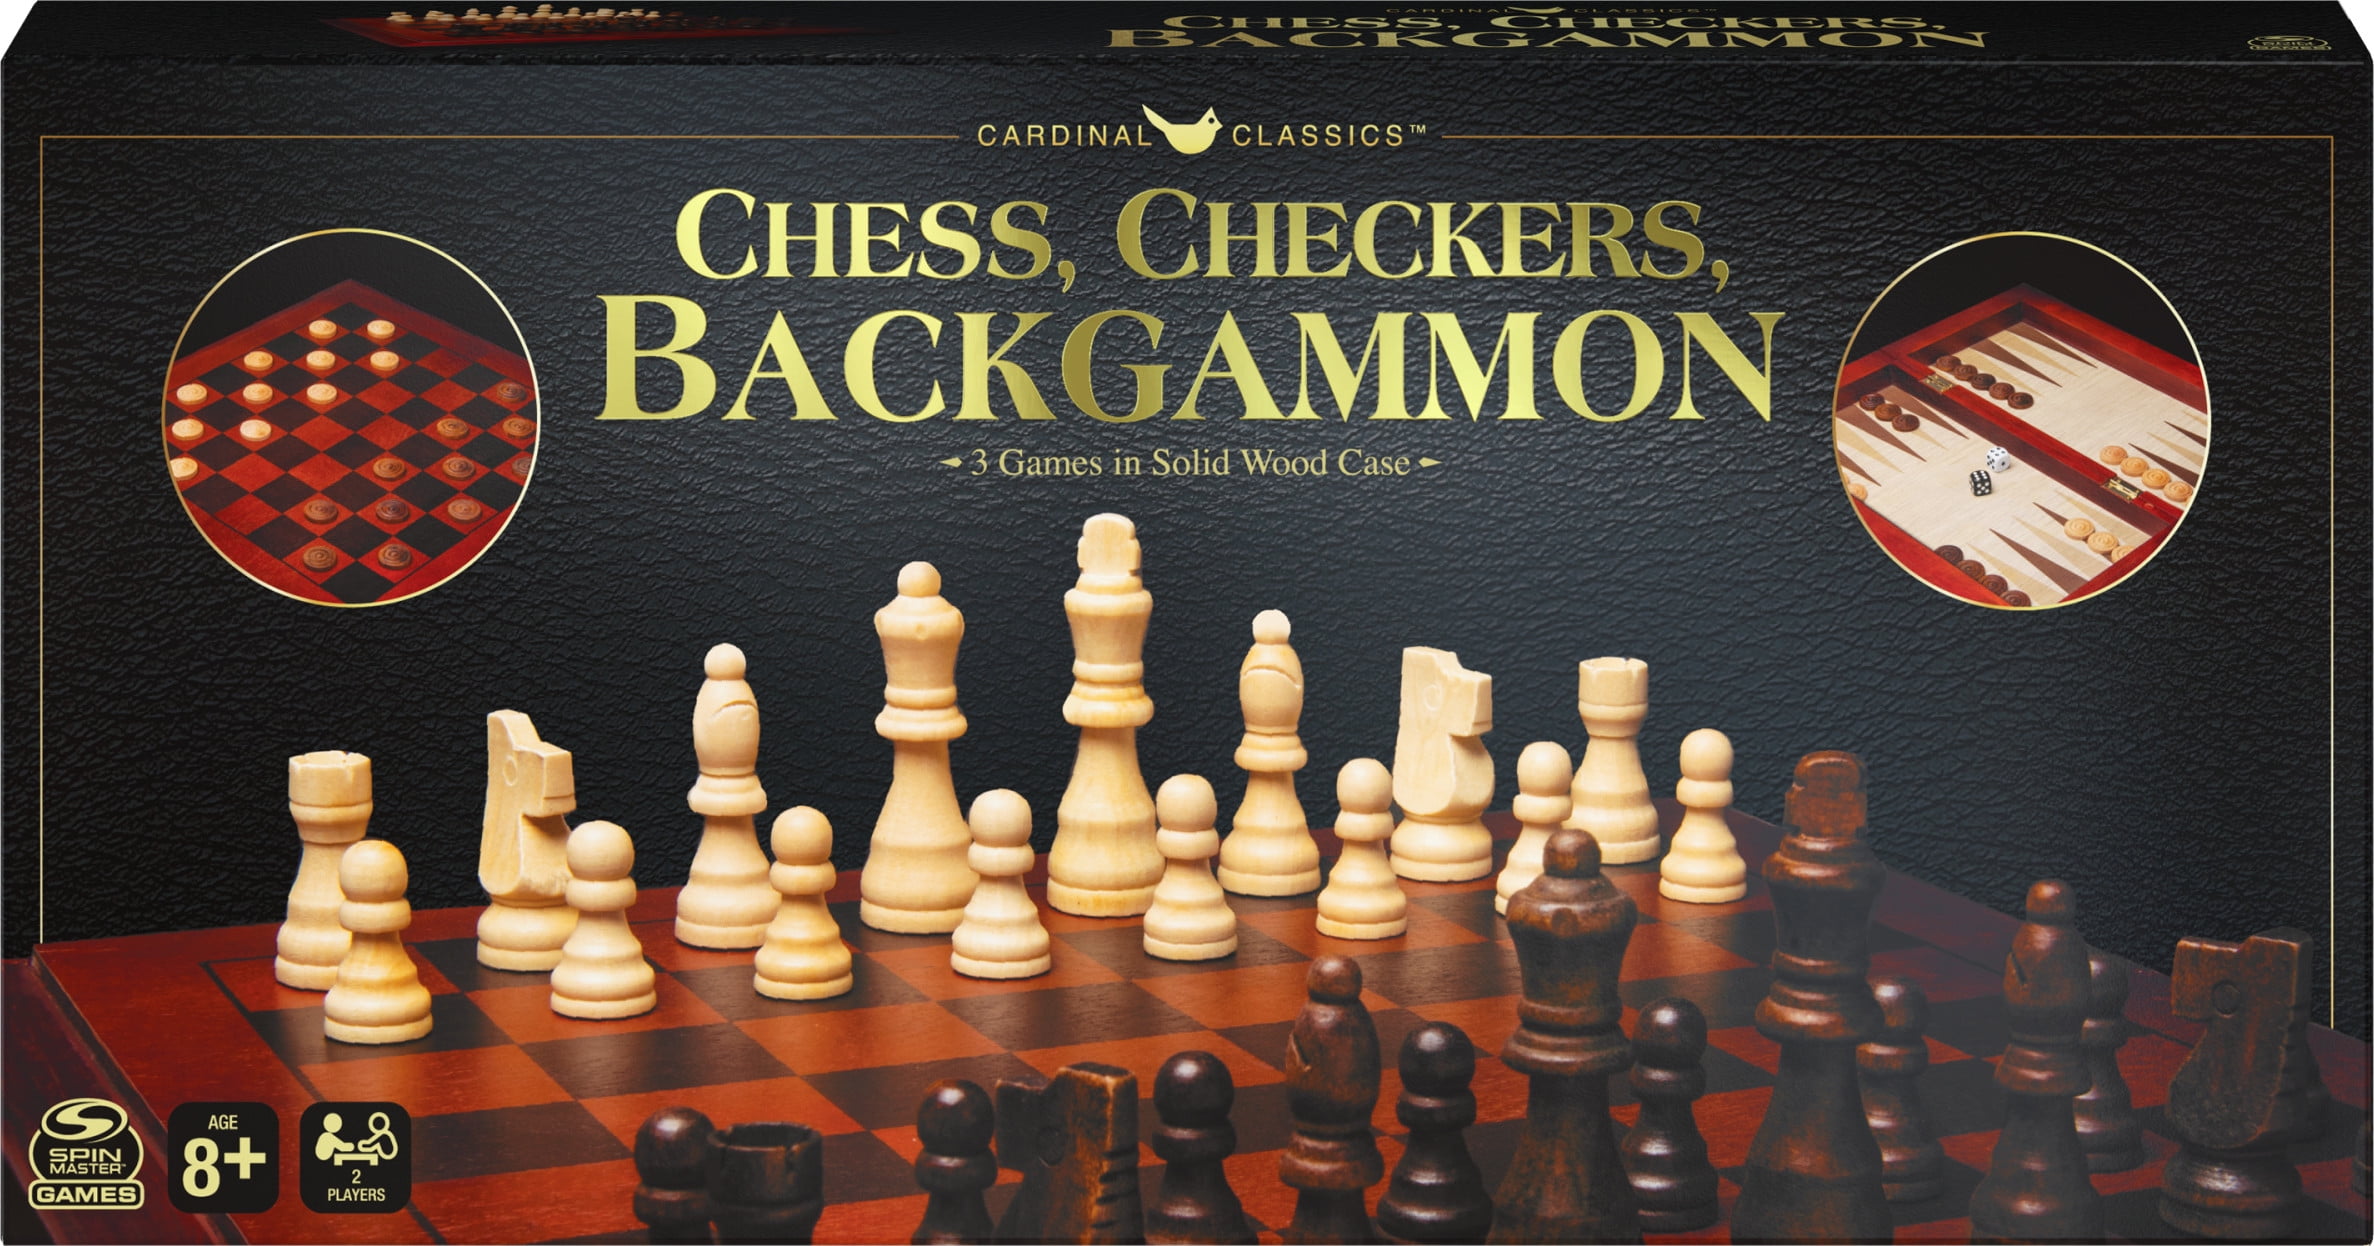 GLASS 3 IN 1 GAME SET CHECKERS BACKGAMMON CHESS BRAND NEW SEALED IN BOX 